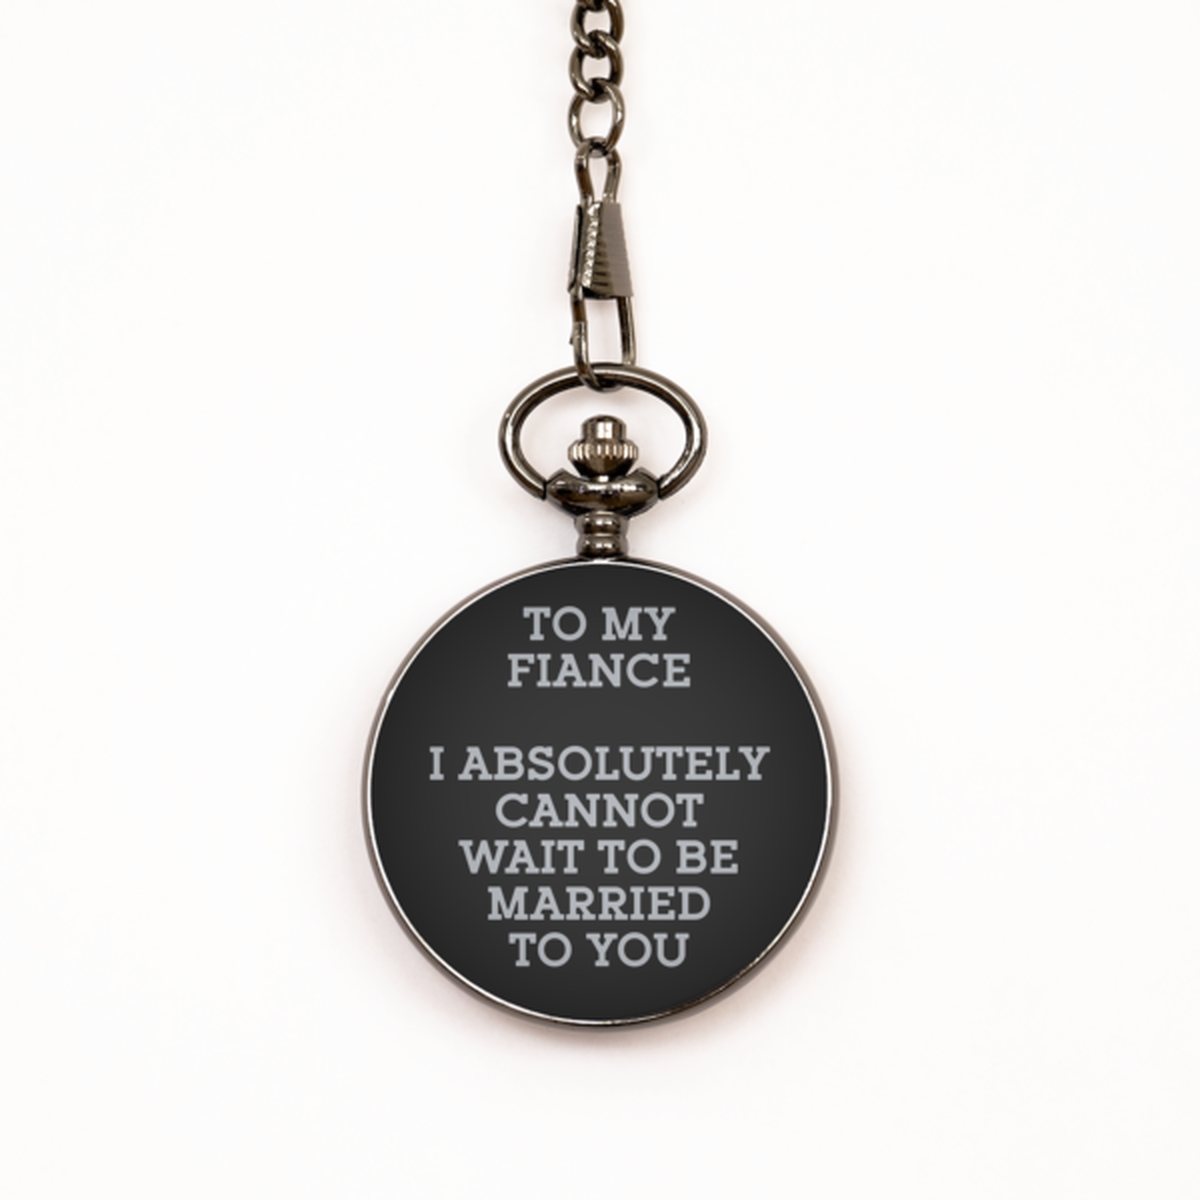 To My Fiance Black Pocket Watch, Cannot Wait To Married To You, Valentines  Gifts For Fiance From Fiancee, Birthday Gifts For Men